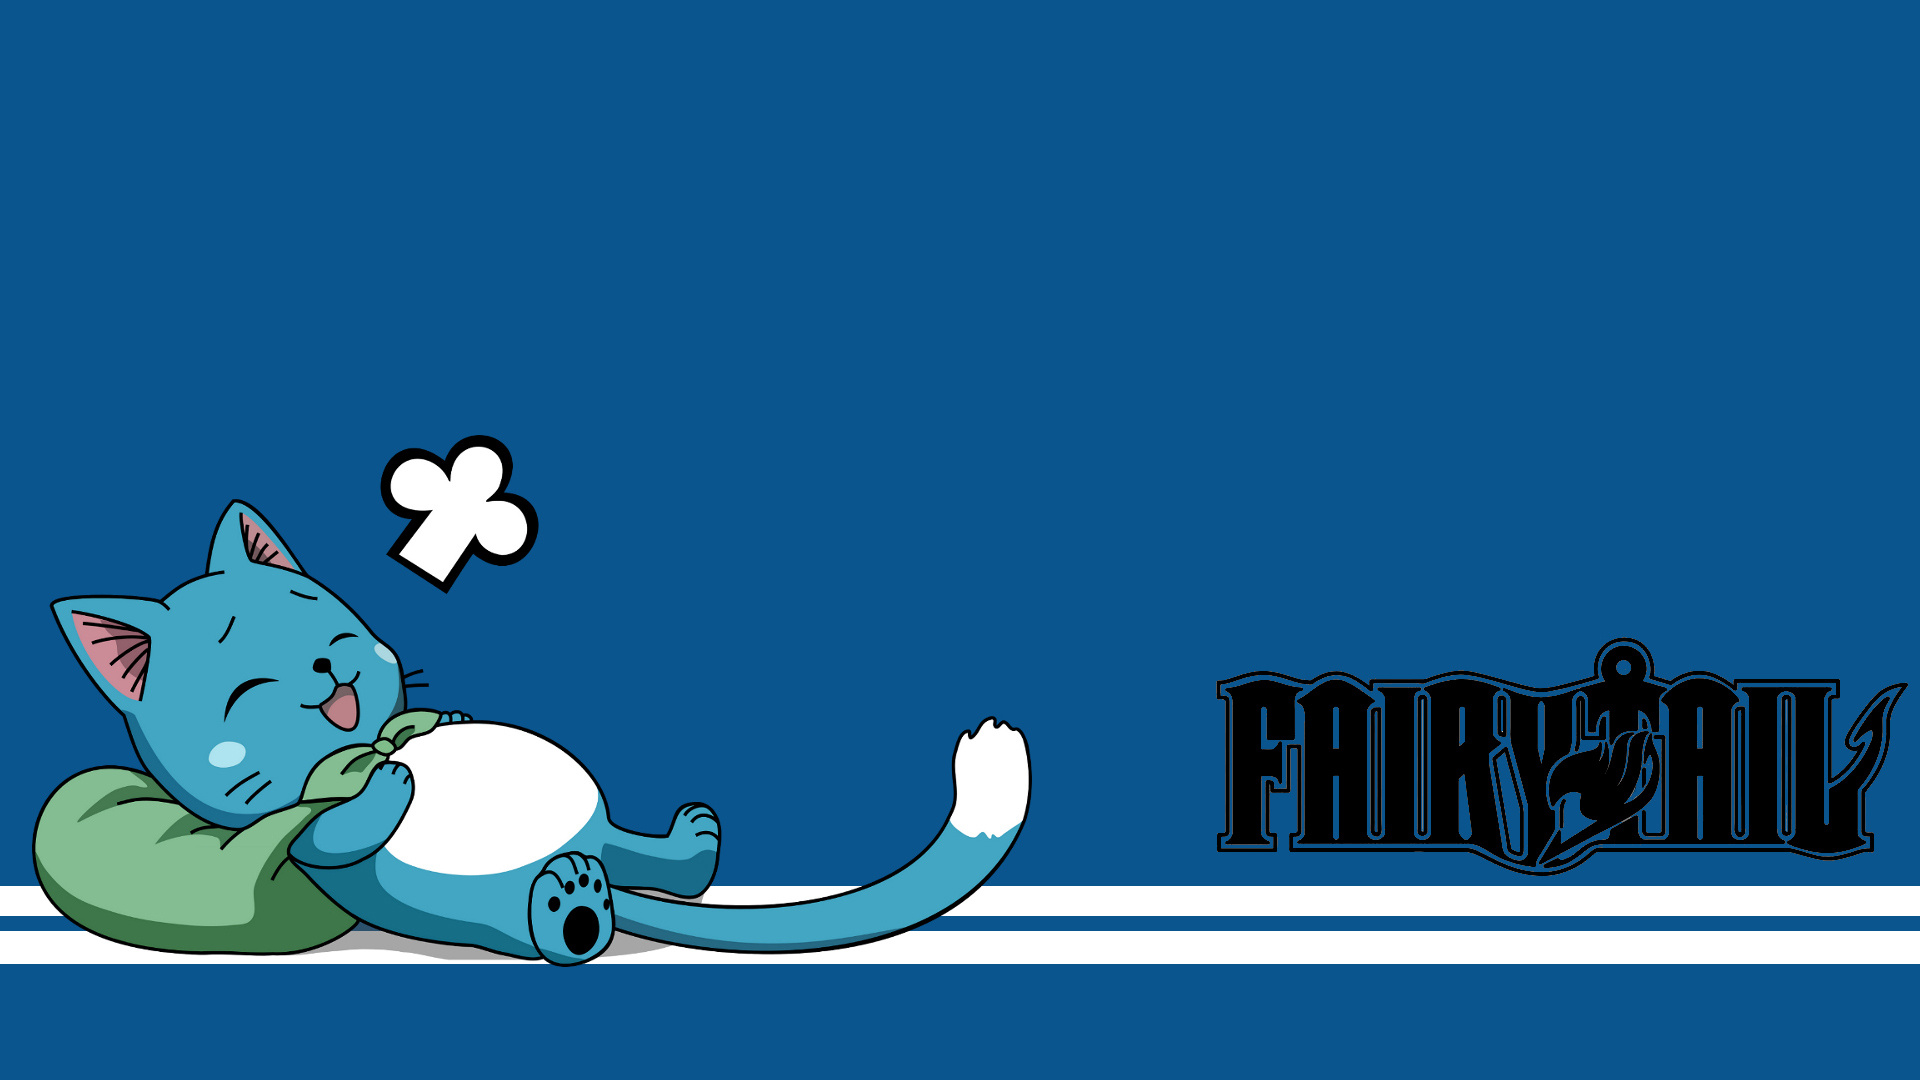 Happy (Fairy Tail): A blue cat-like male who is capable of using flight magic and talk like a human being. 1920x1080 Full HD Background.